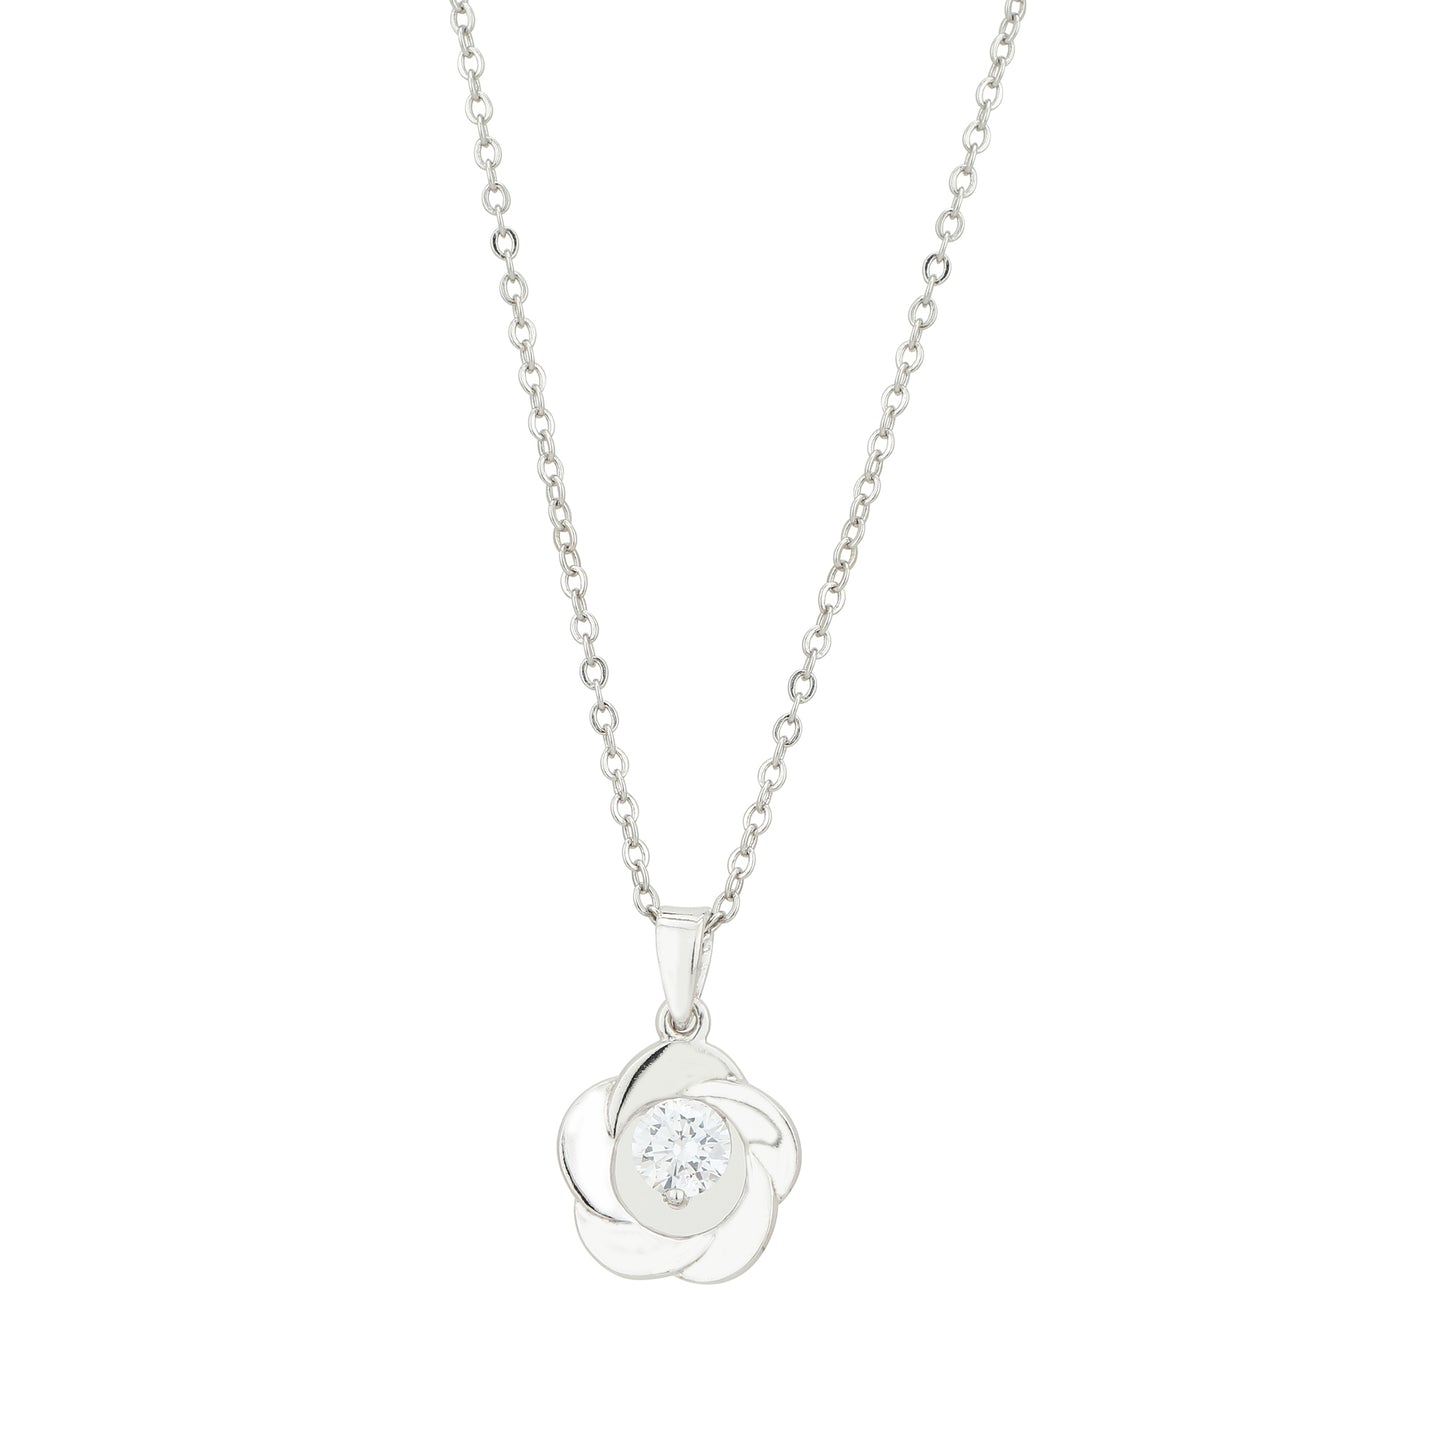 Carlton London Silver Floral Pendant Charm Necklace with Round Centre Stone